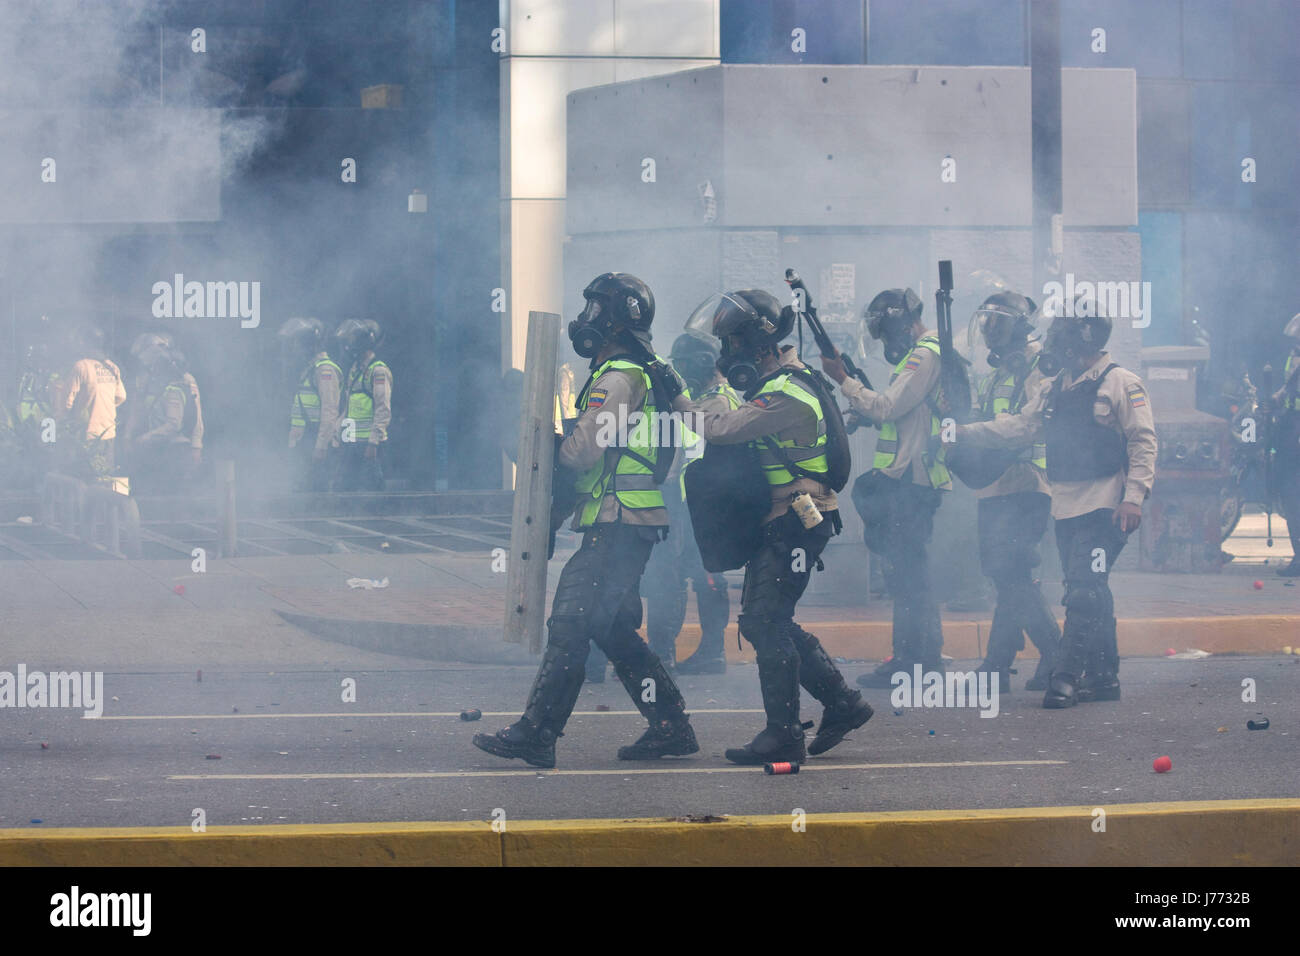 Police officers use tear gas a rubber pellets against demonstrators during a protest against the government of Nicolas Maduro in Caracas. Stock Photo